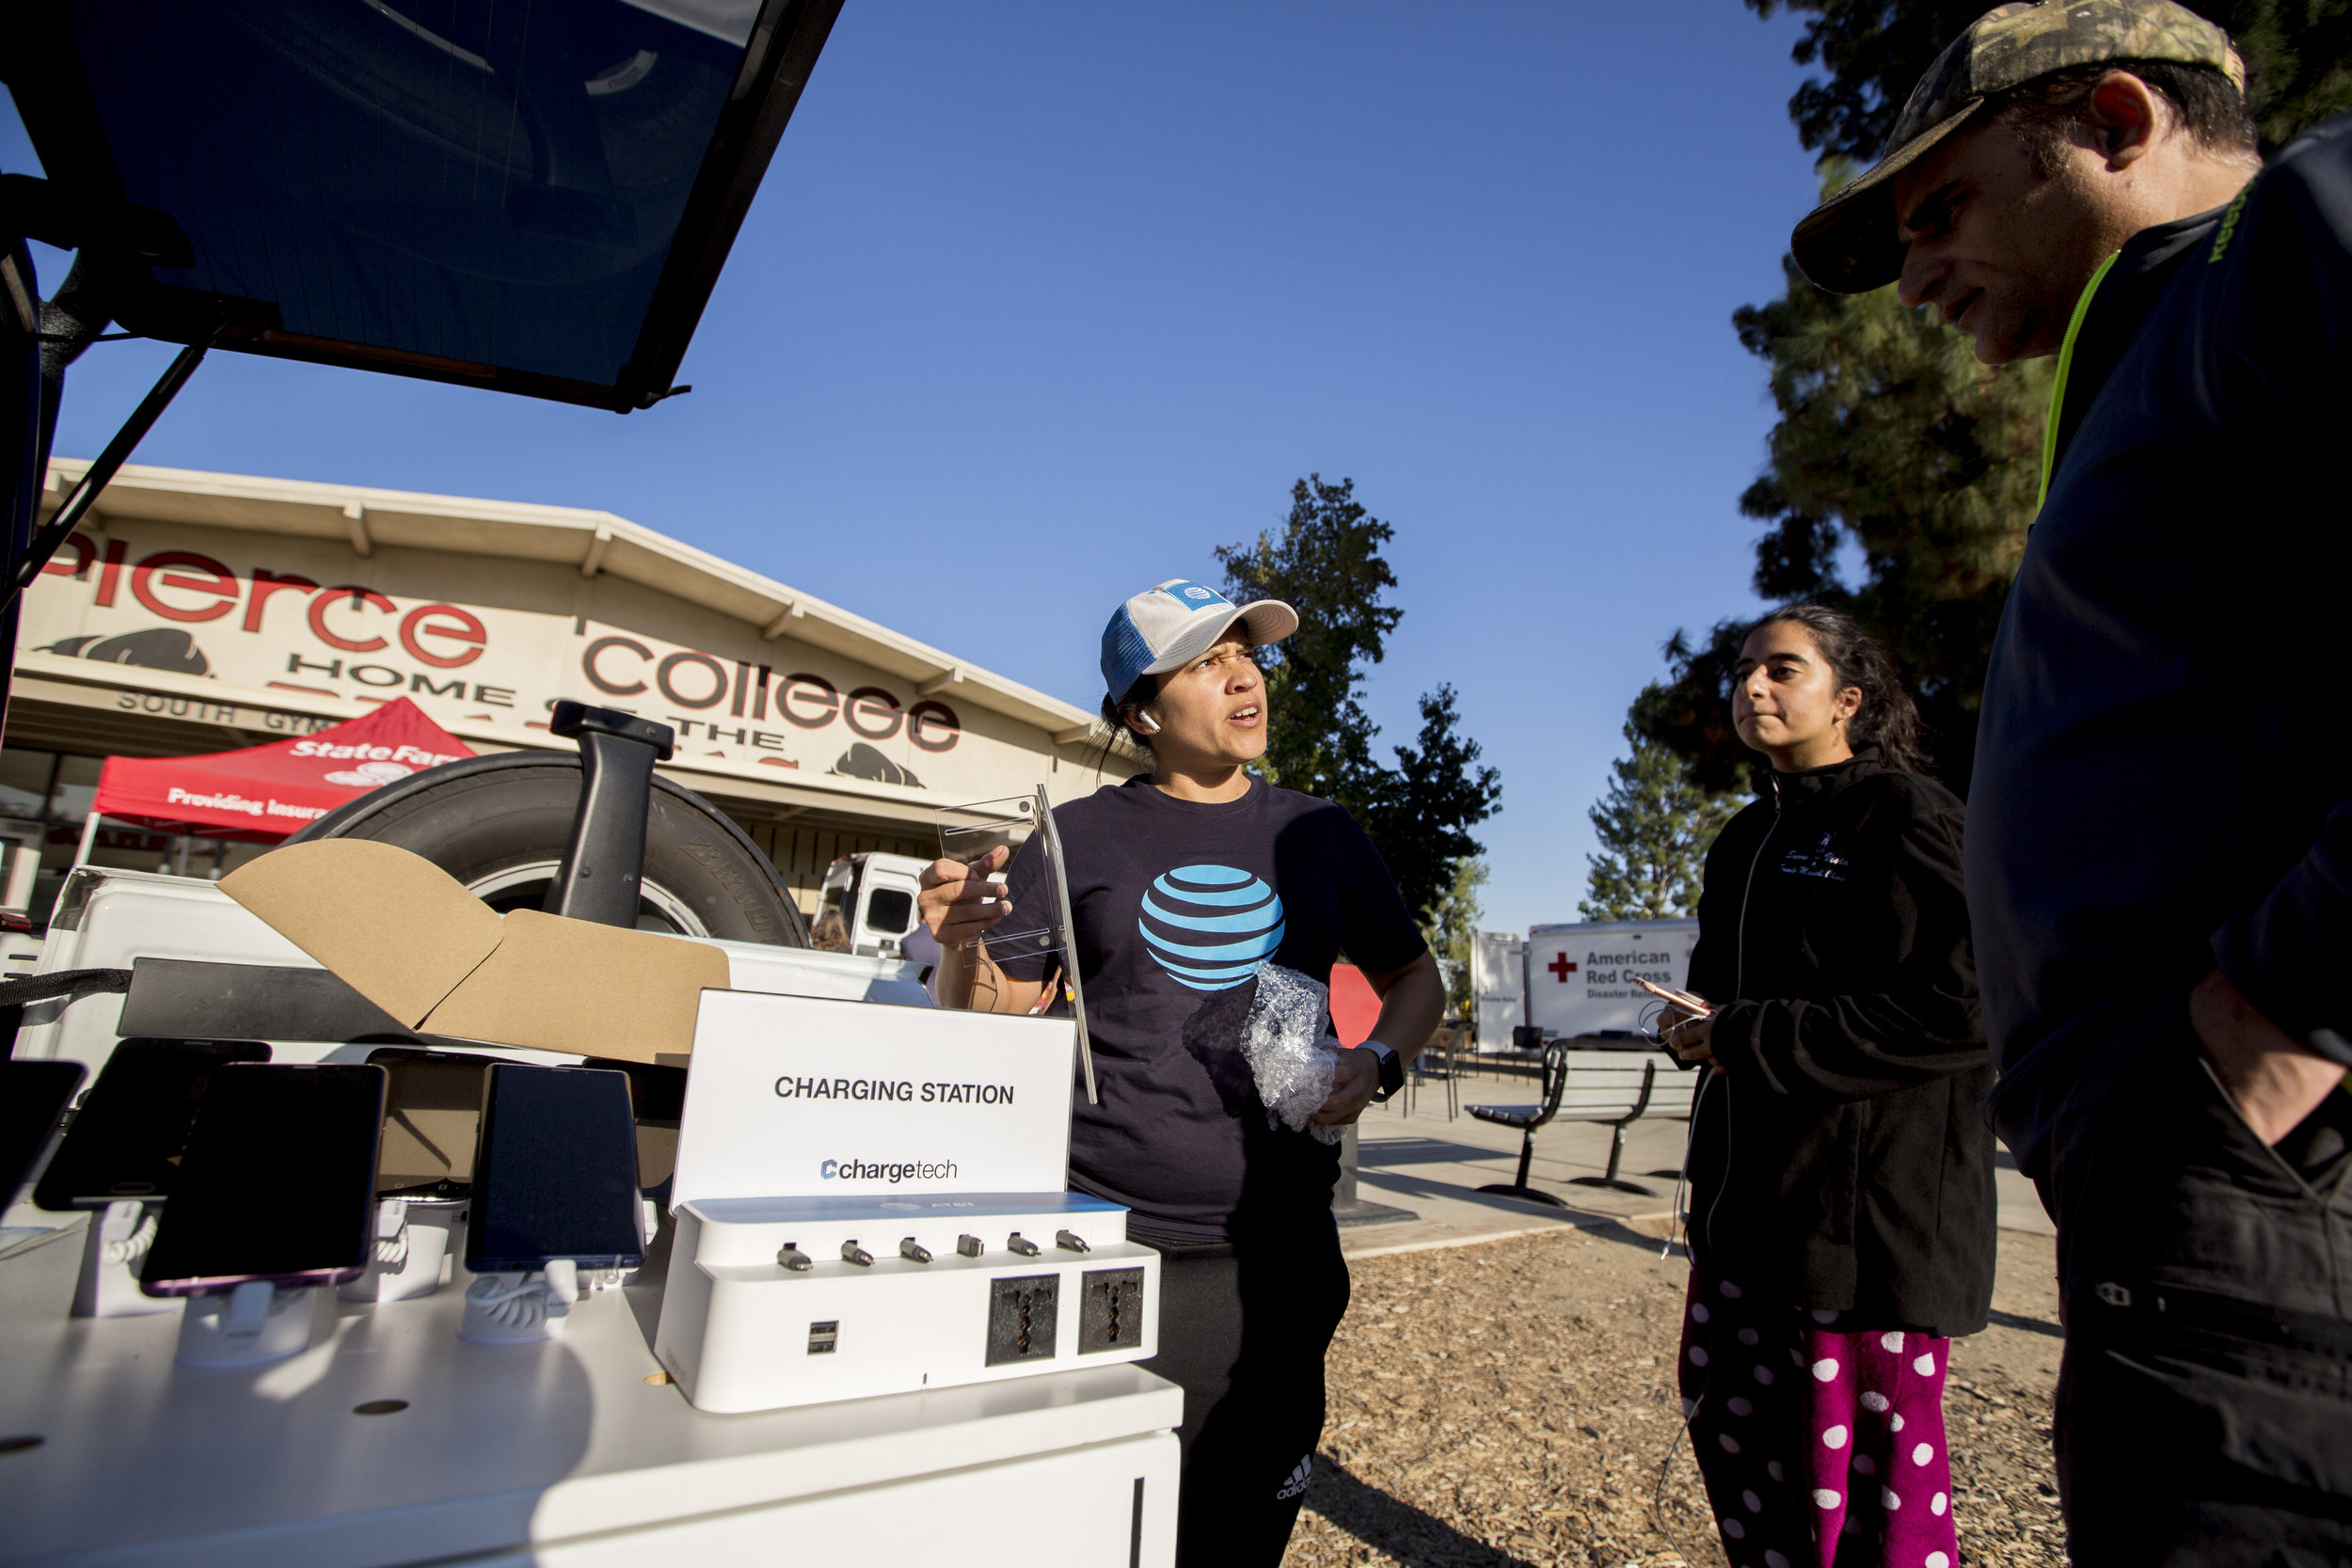  Crystal Segura, with ATT, speaks with evacuees inviting them to charge their phones at the charging station that she is setting up at the Woolsey fire evacuation center at Los Angeles Pierce College on November 9, 2018 in Woodland Hills, Calif. (Jos